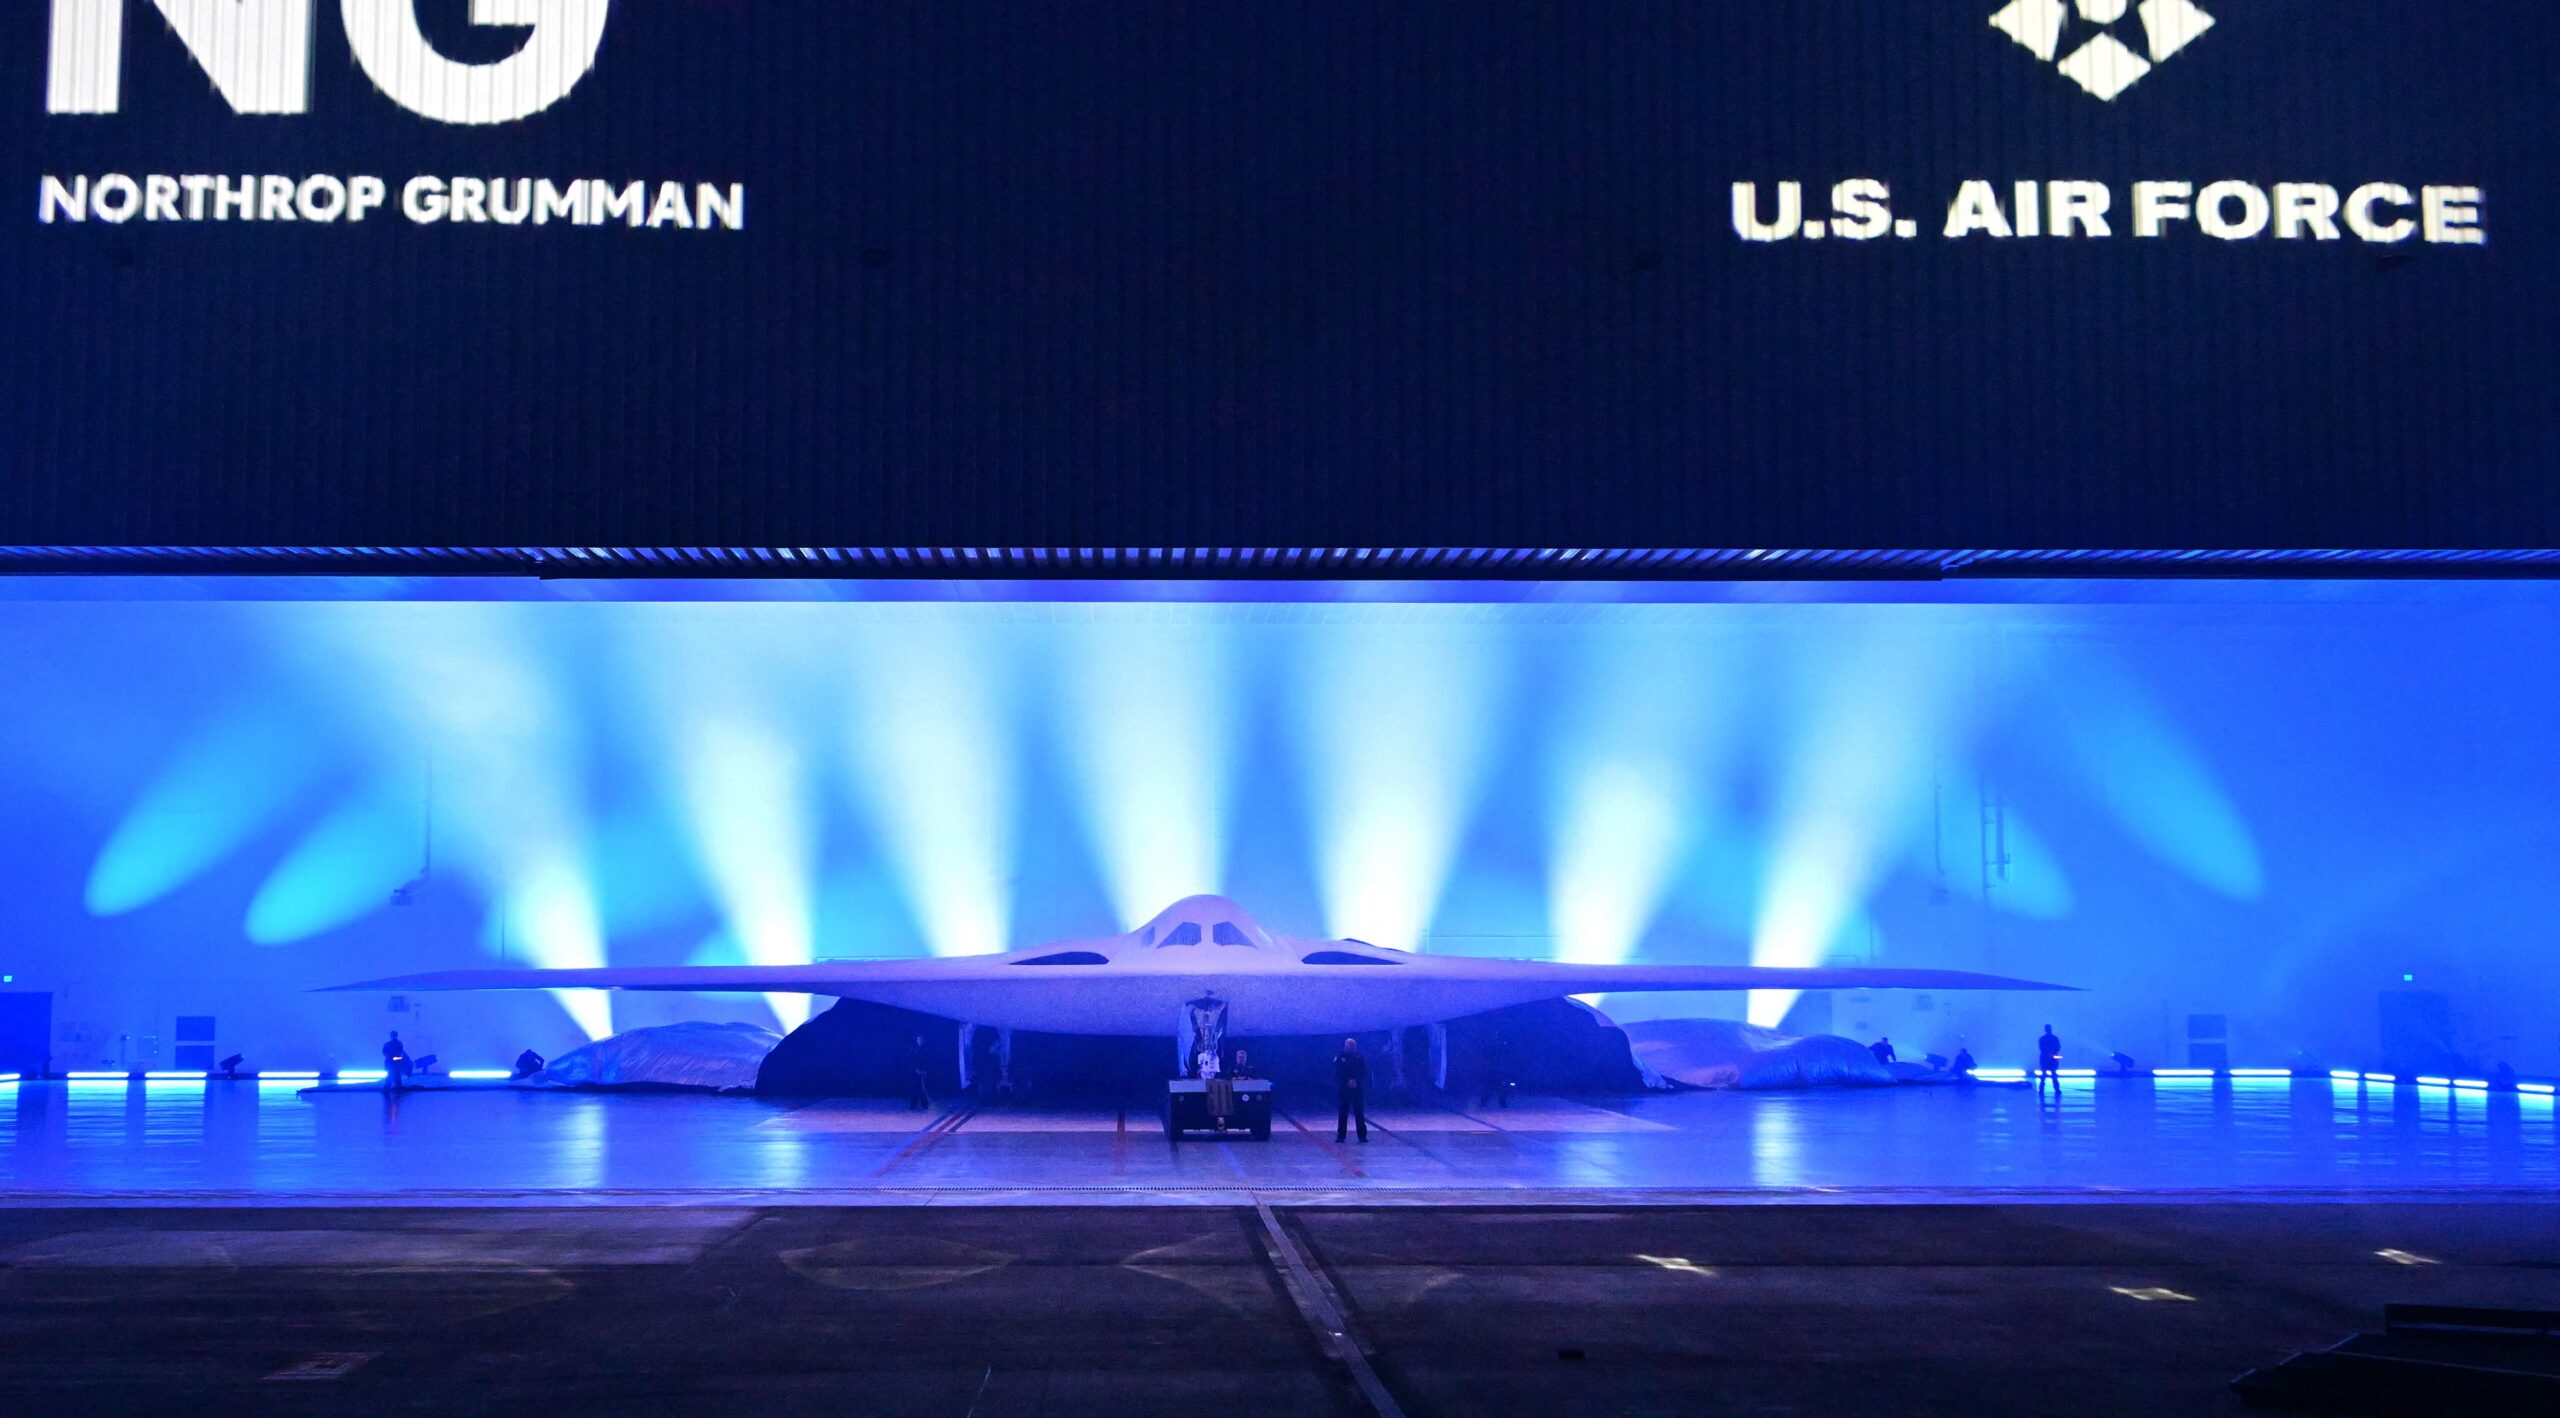 The new B-21 Raider is unveilled during a ceremony at Northrop Grumman's Air Force Plant 42 in Palmdale, California, December 2, 2022. - The high-tech stealth bomber can carry nuclear and conventional weapons and is designed to be able to fly without a crew on board. The B-21 -- which is on track to cost nearly $700 million per plane and is the first new US bomber in decades -- will gradually replace the B-1 and B-2 aircraft, which first flew during the Cold War. (Photo by Frederic J. BROWN / AFP) (Photo by FREDERIC J. BROWN/AFP via Getty Images)